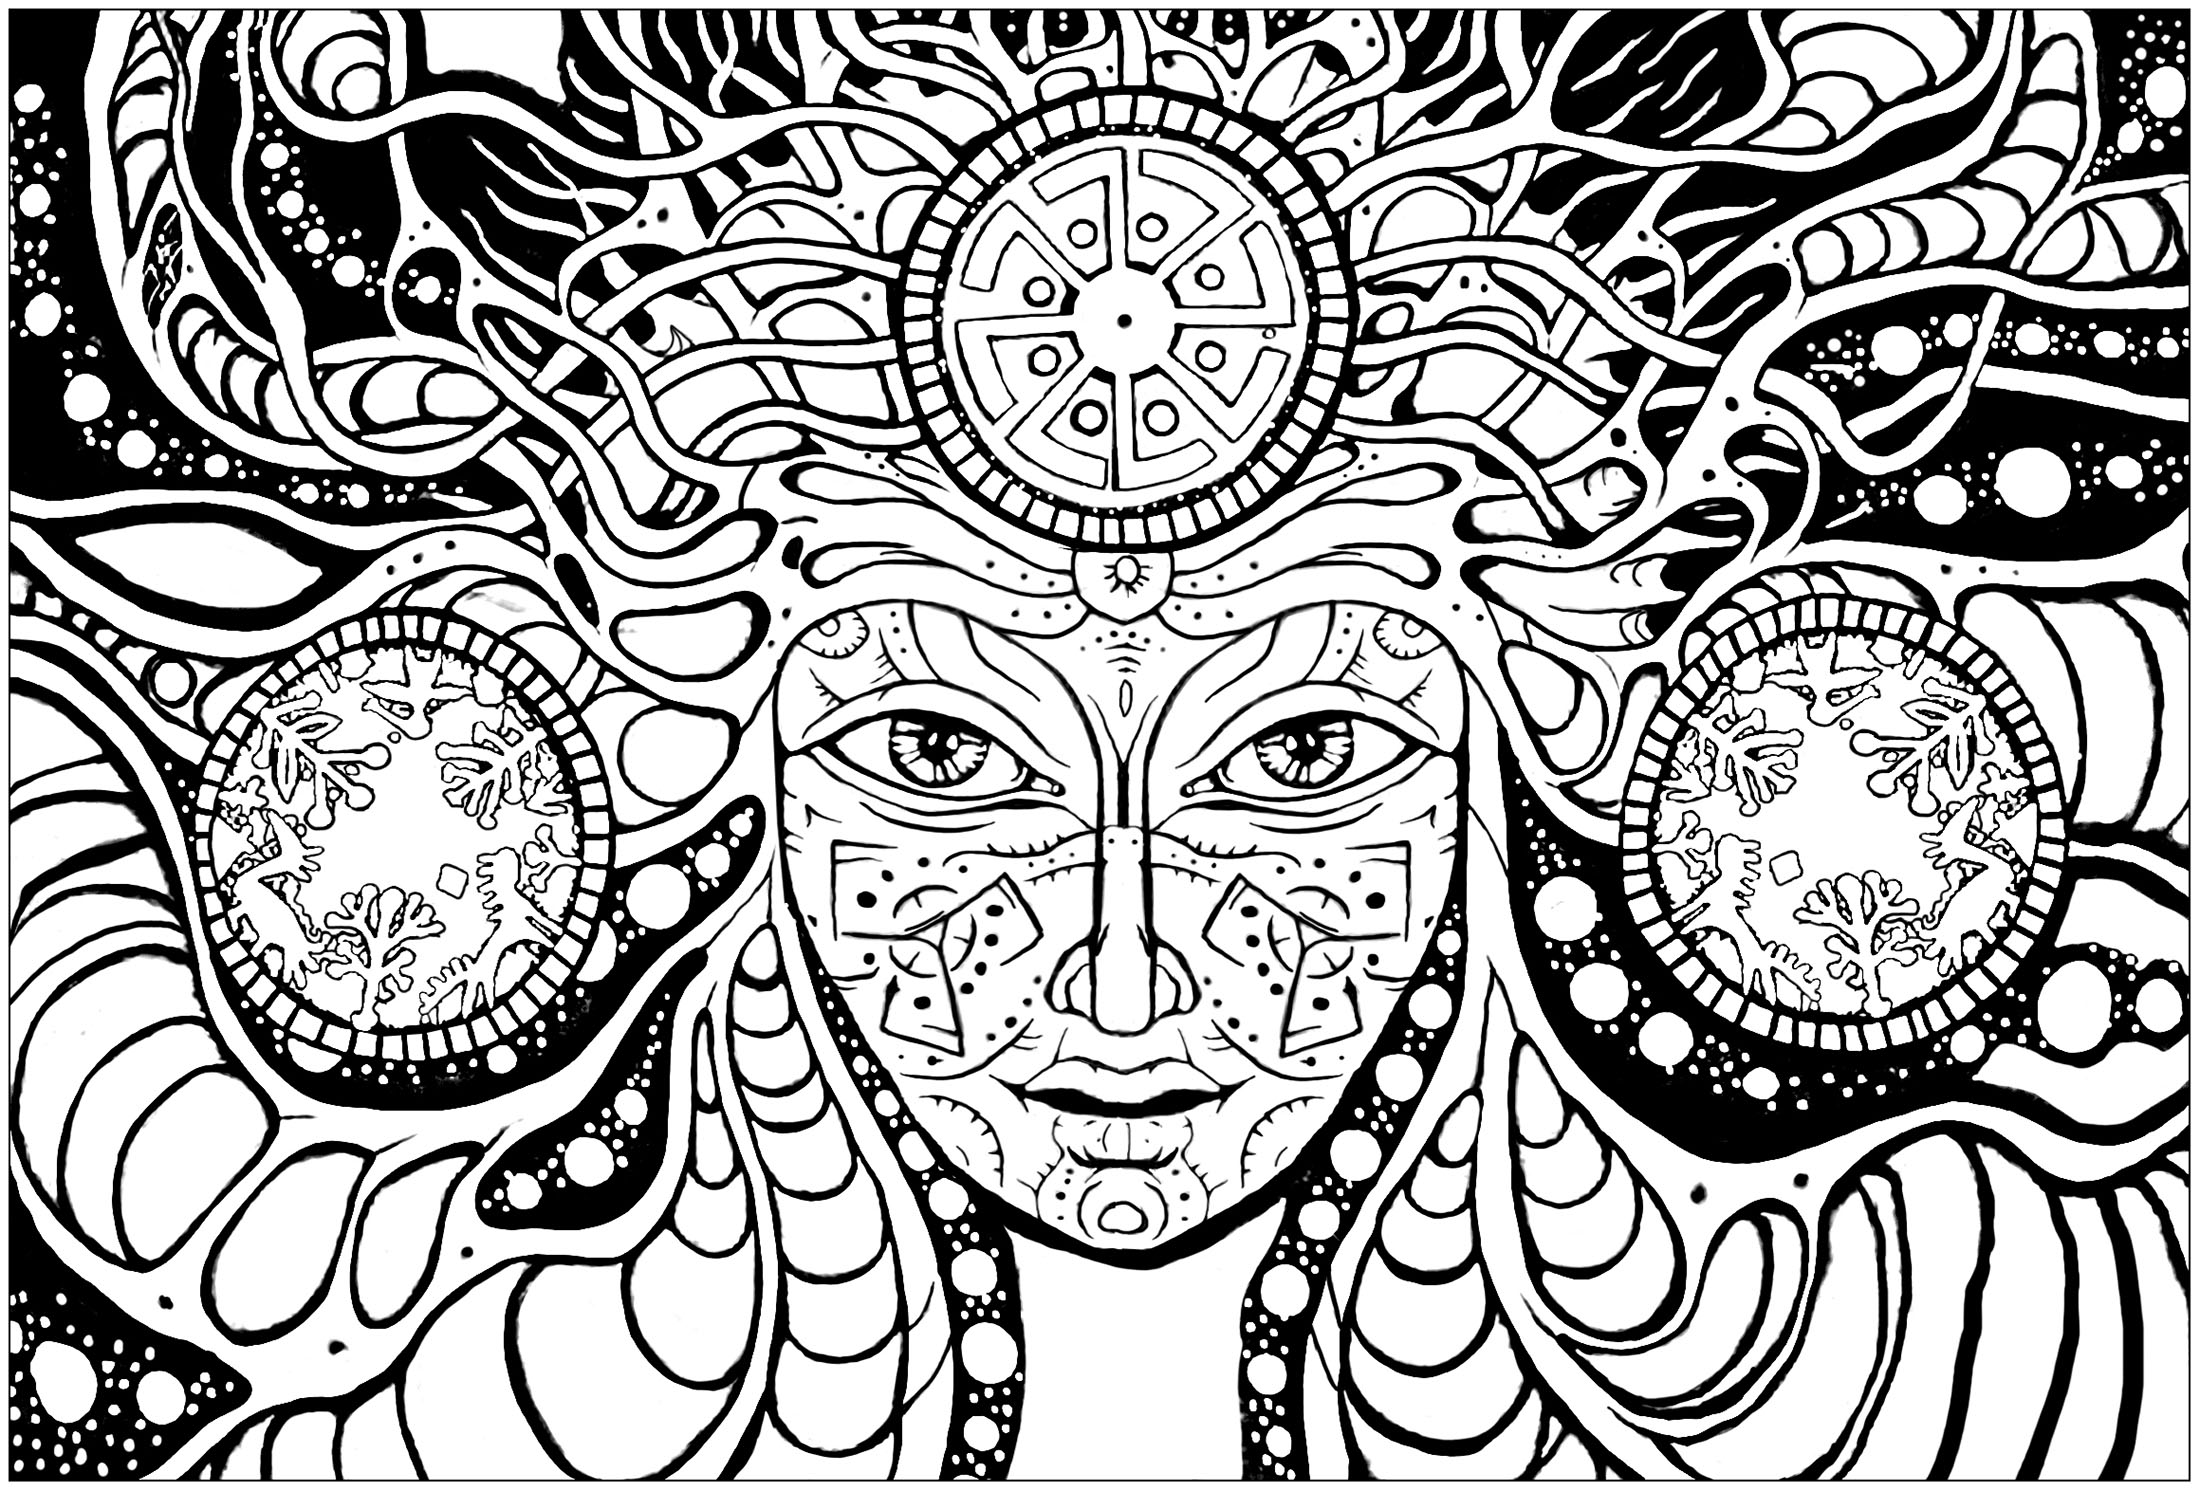 Psychedelic woman : color this woman face and the strange patterns that surround her